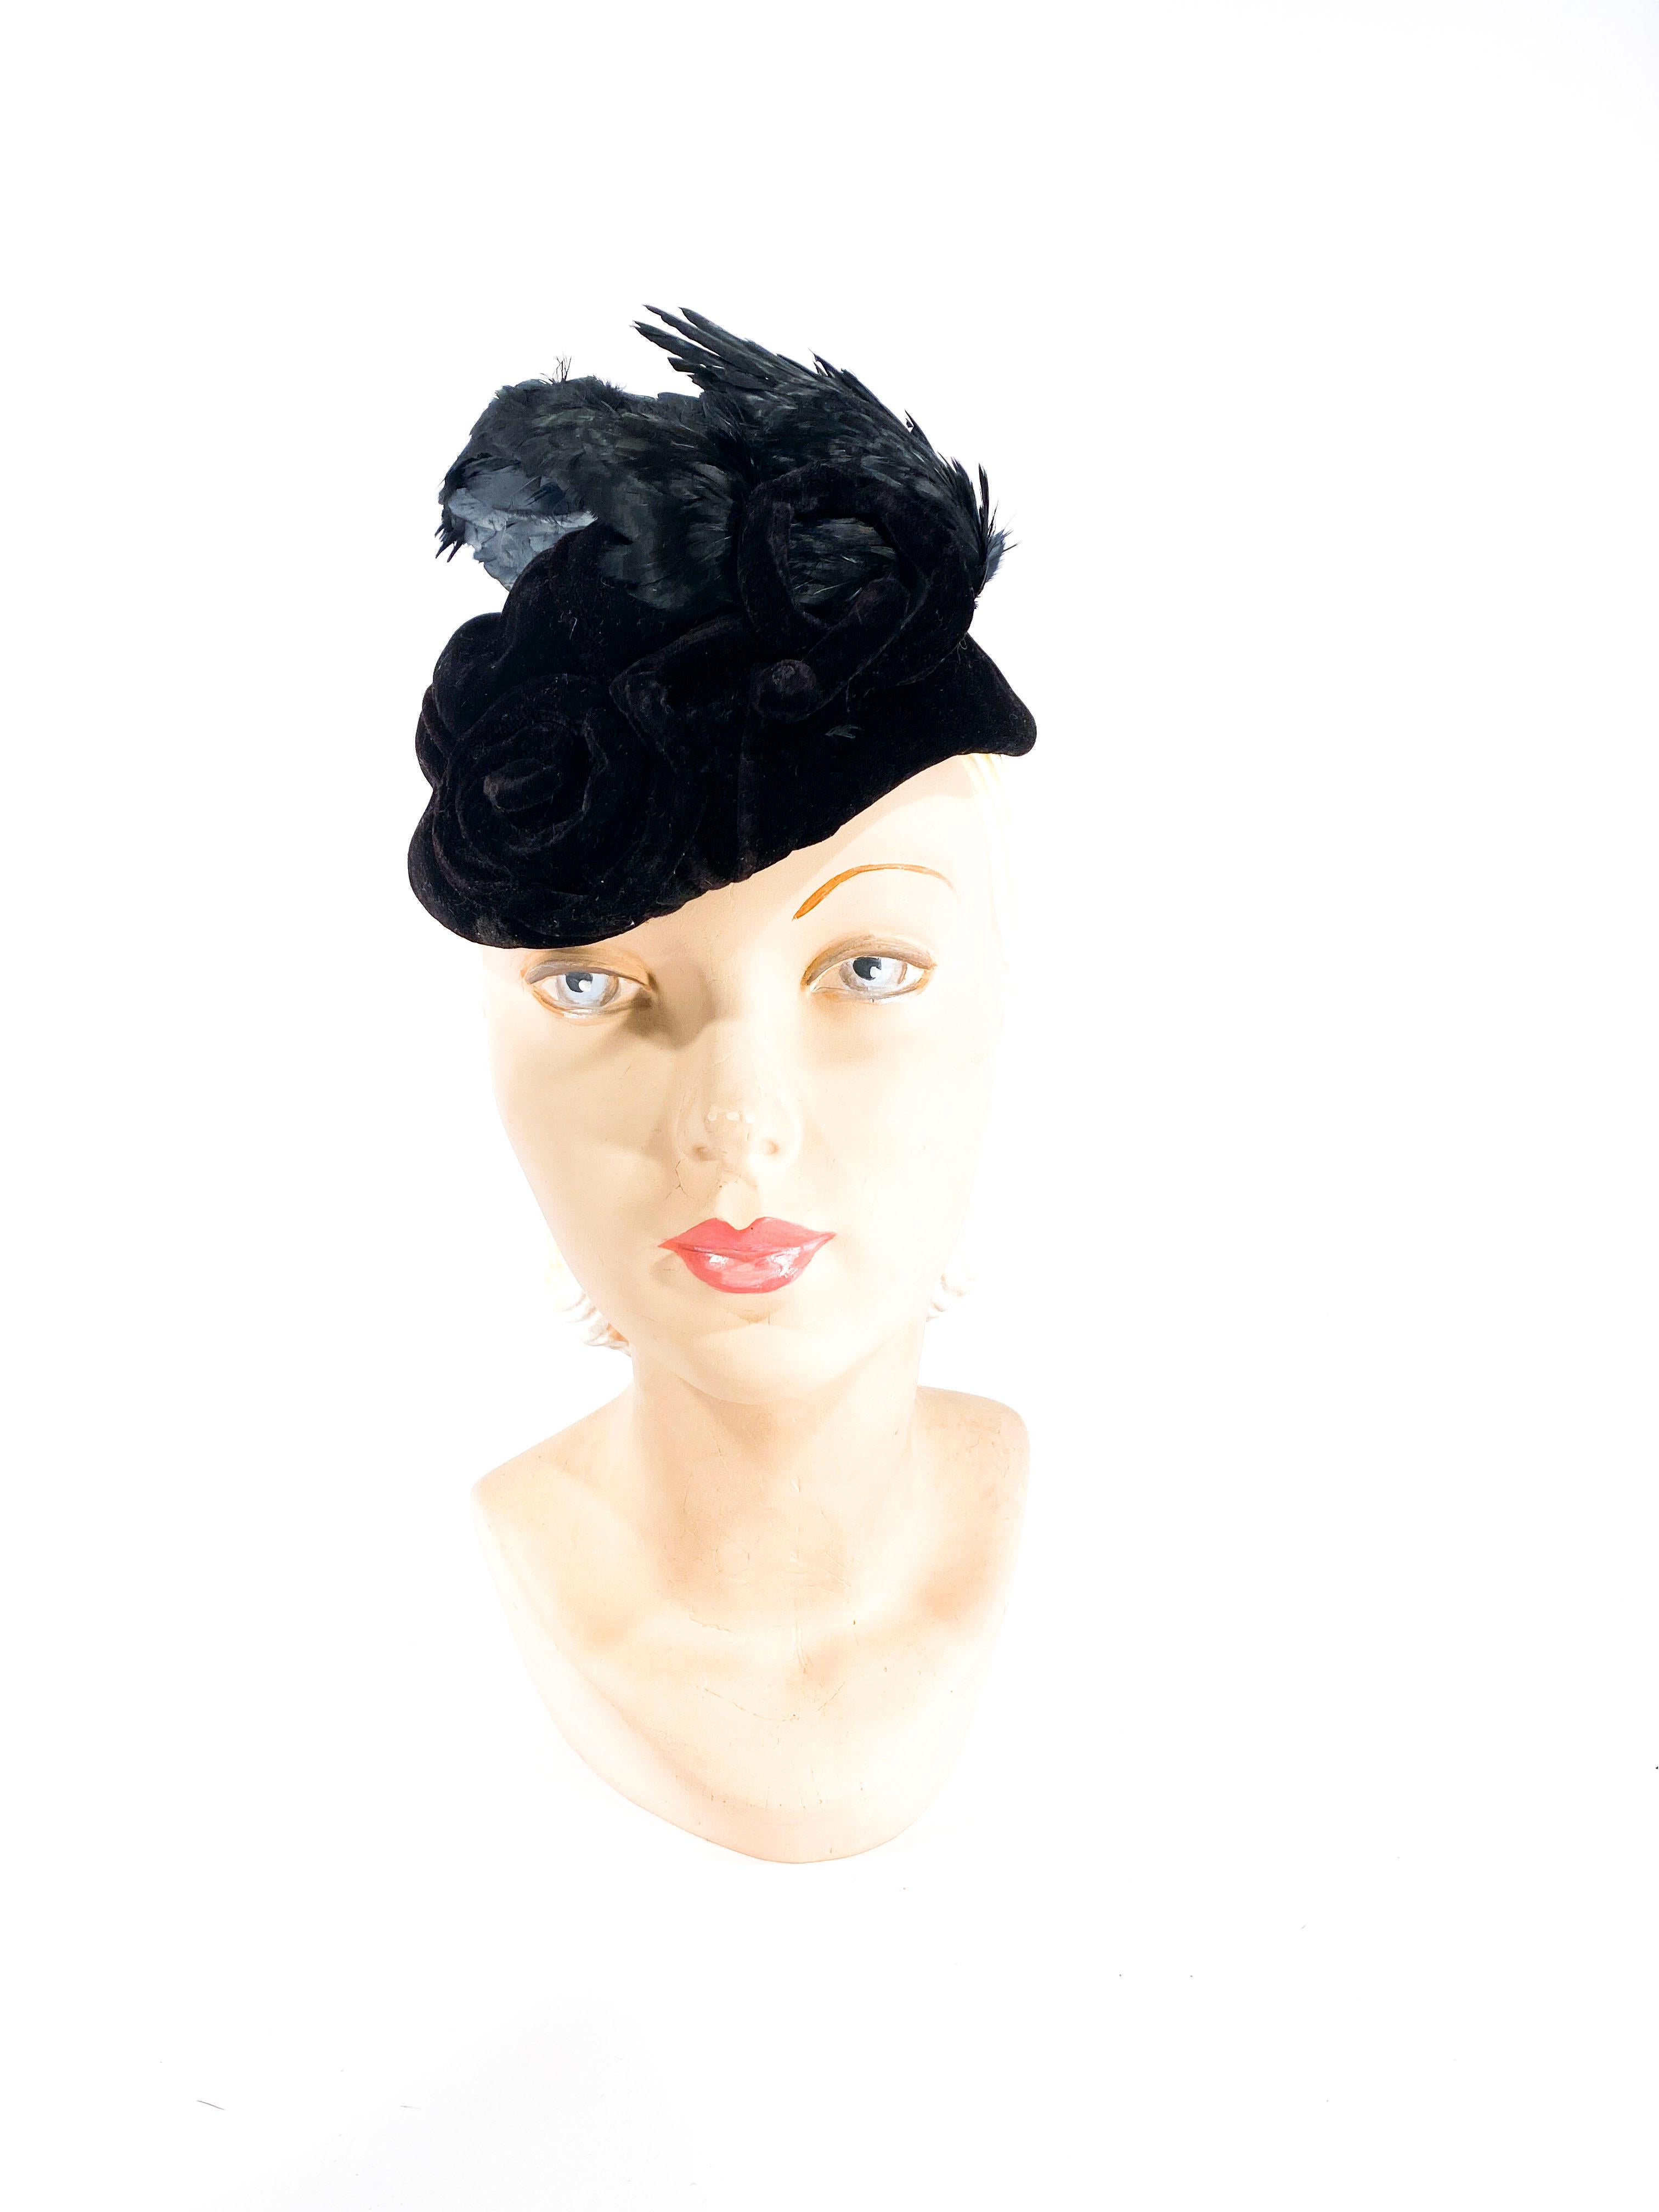 Early 1930s I. Magnin hand-sculptured black velvet perch hat with enlarged piping details though out the base of the hat in circular designs. The hat is finished with very large doubled bird wing feathers that decorated the entire top of the hat. 